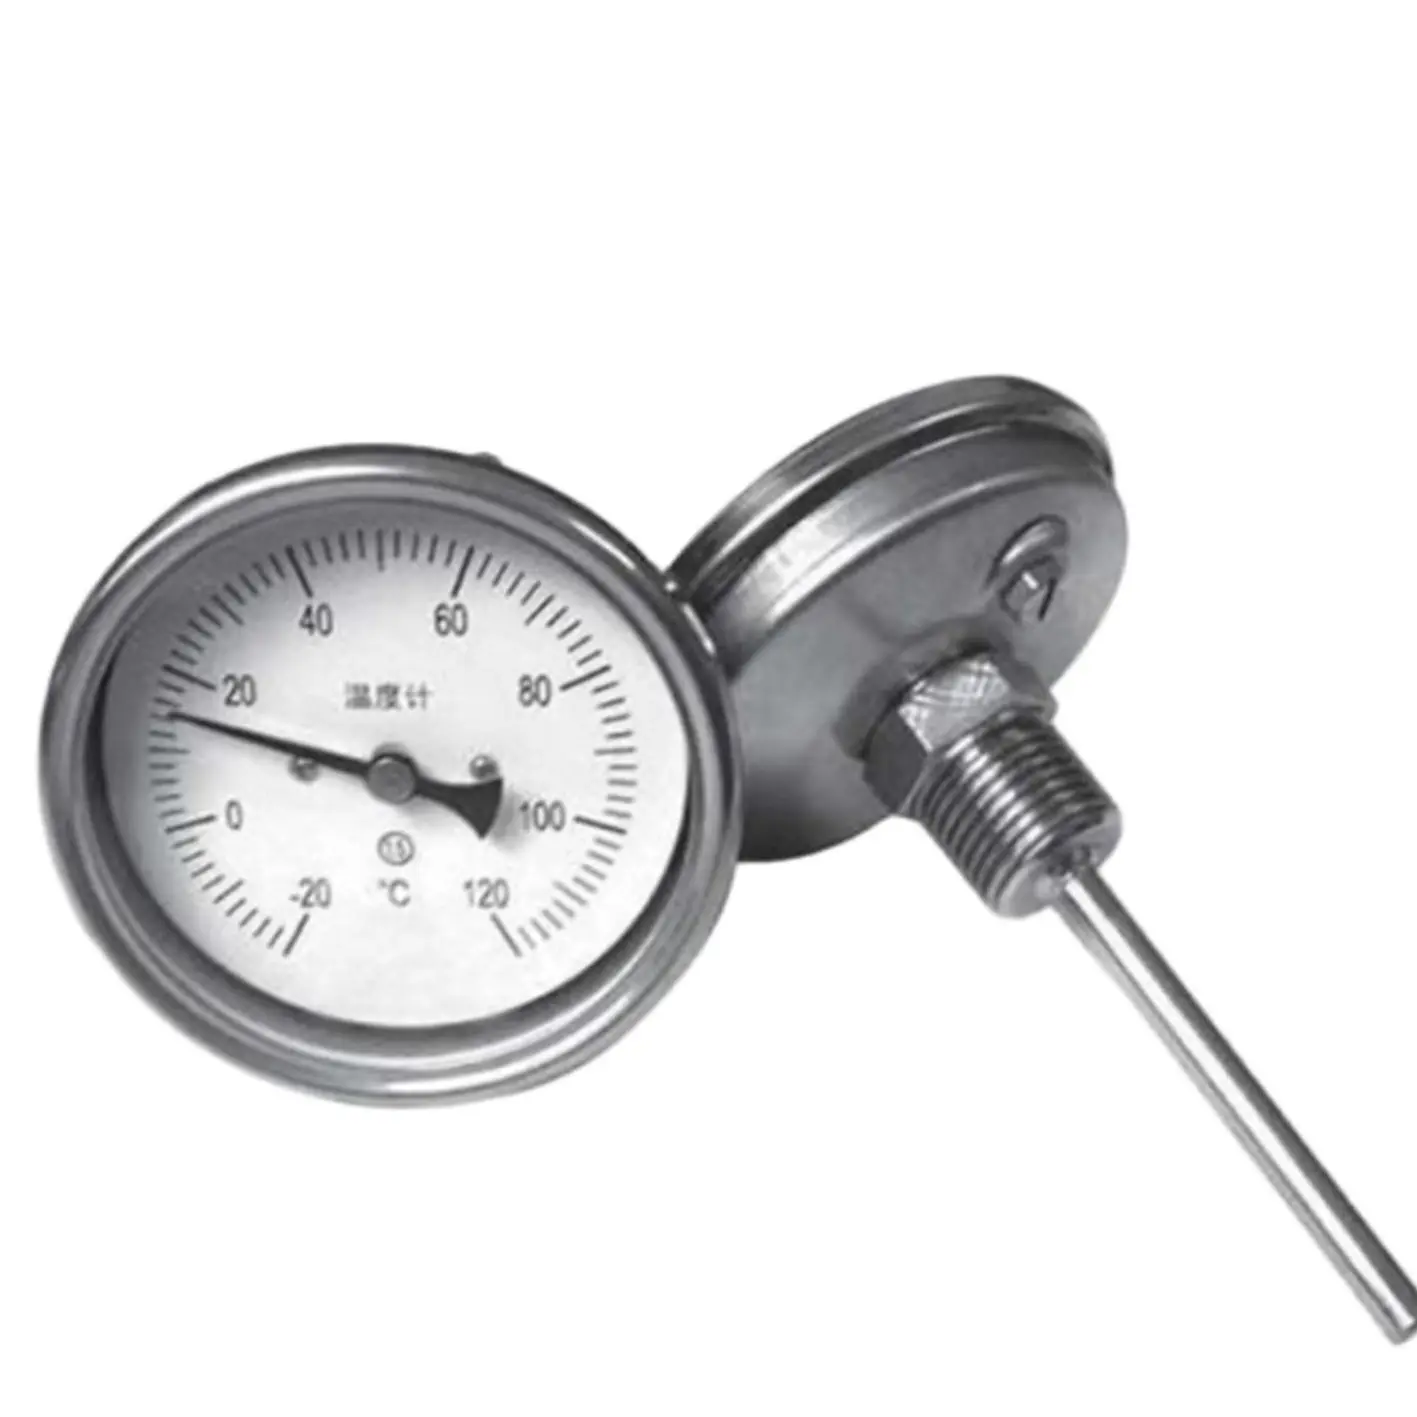 High Quality Pipe Thermometers Bimetal Thermometer Anlegethermometer  Galvanized Steel Rohrthermometer Stainless Steel - AliExpress